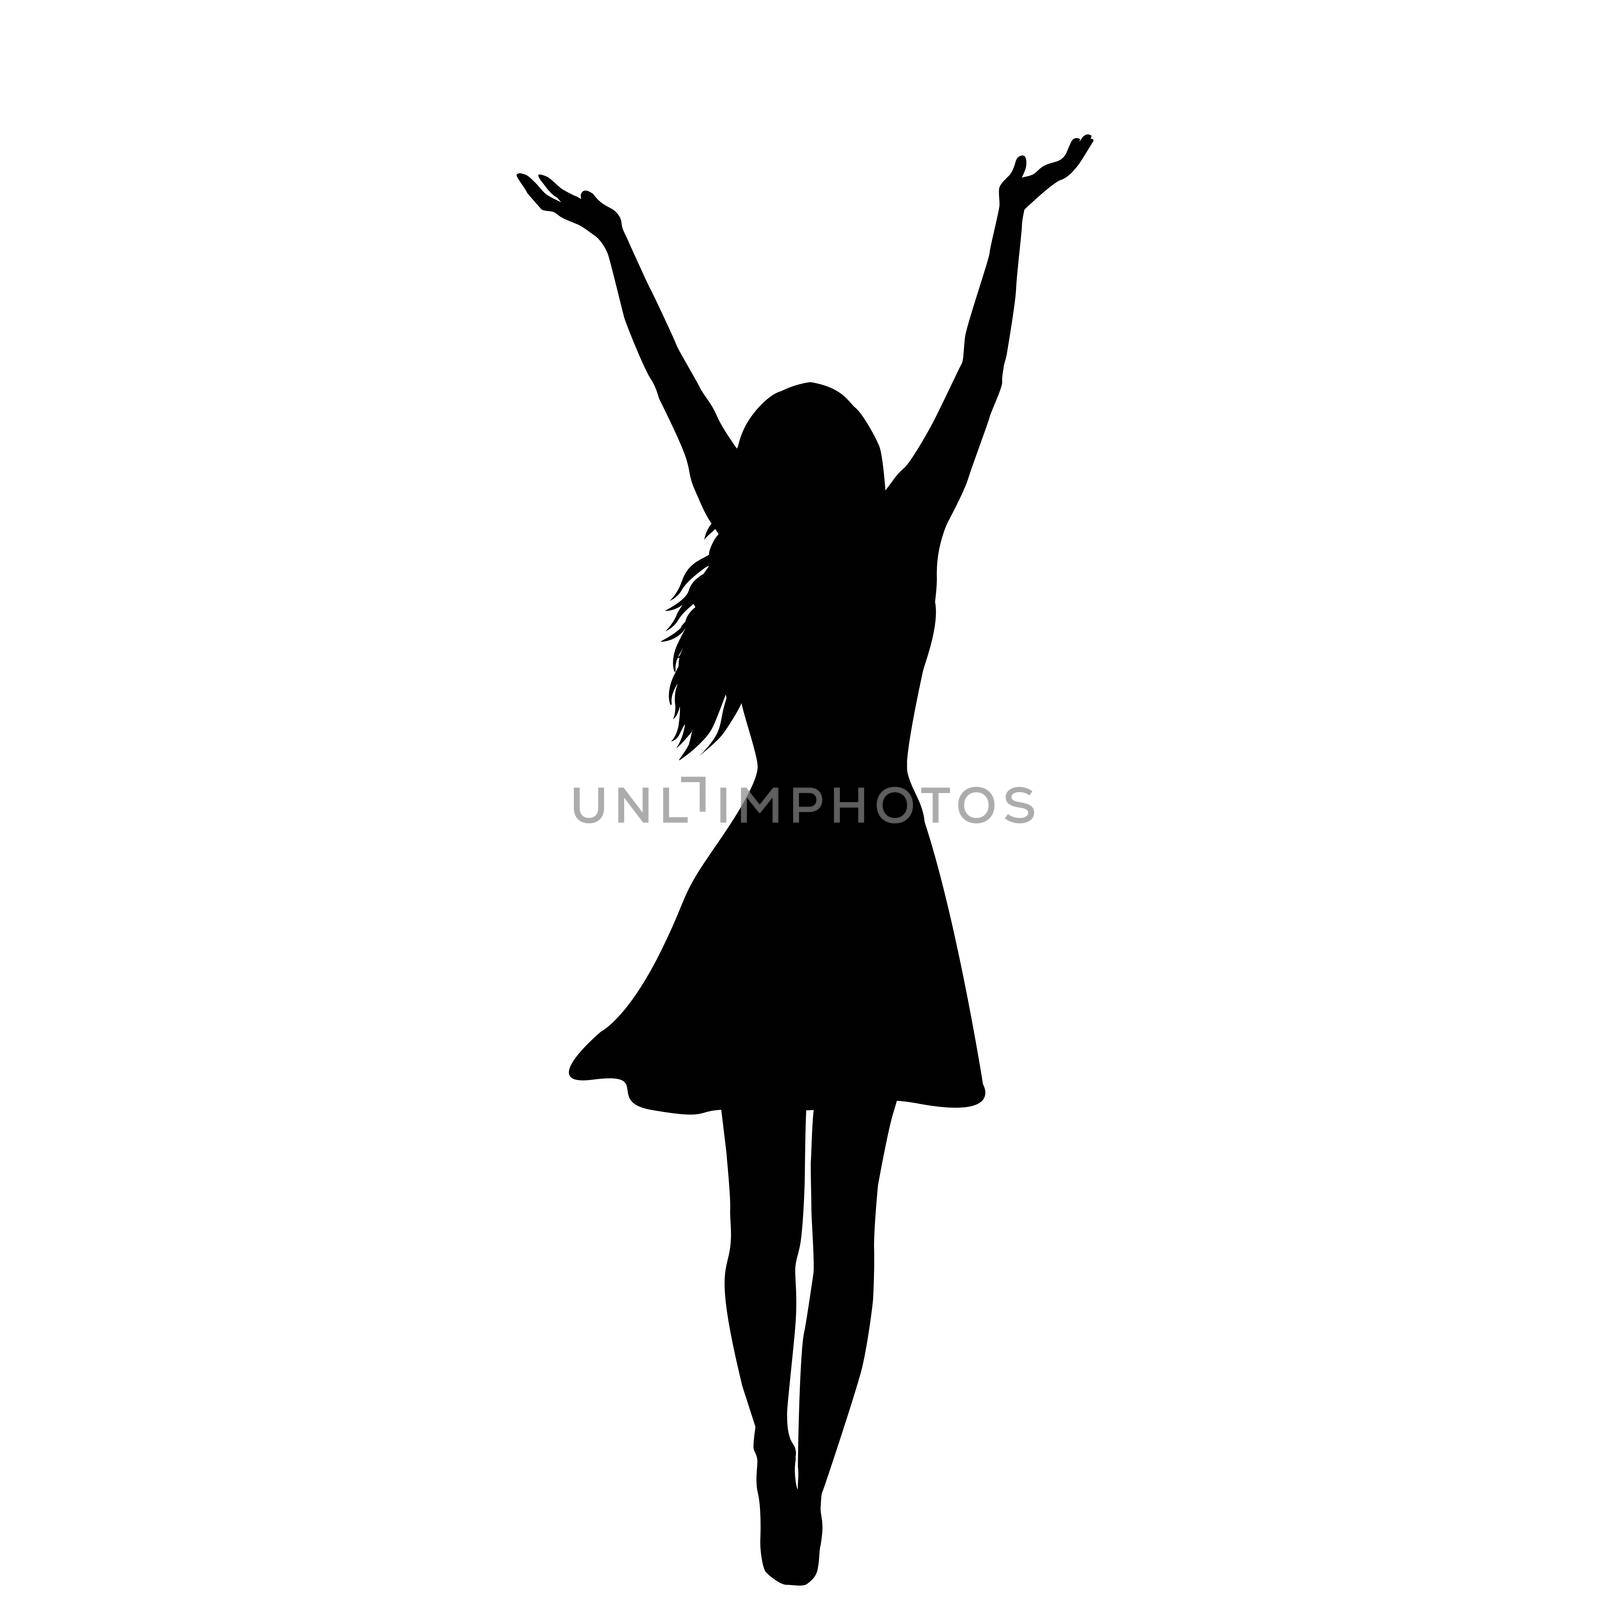 Silhouette of a woman with arms raised enjoy the life by hibrida13